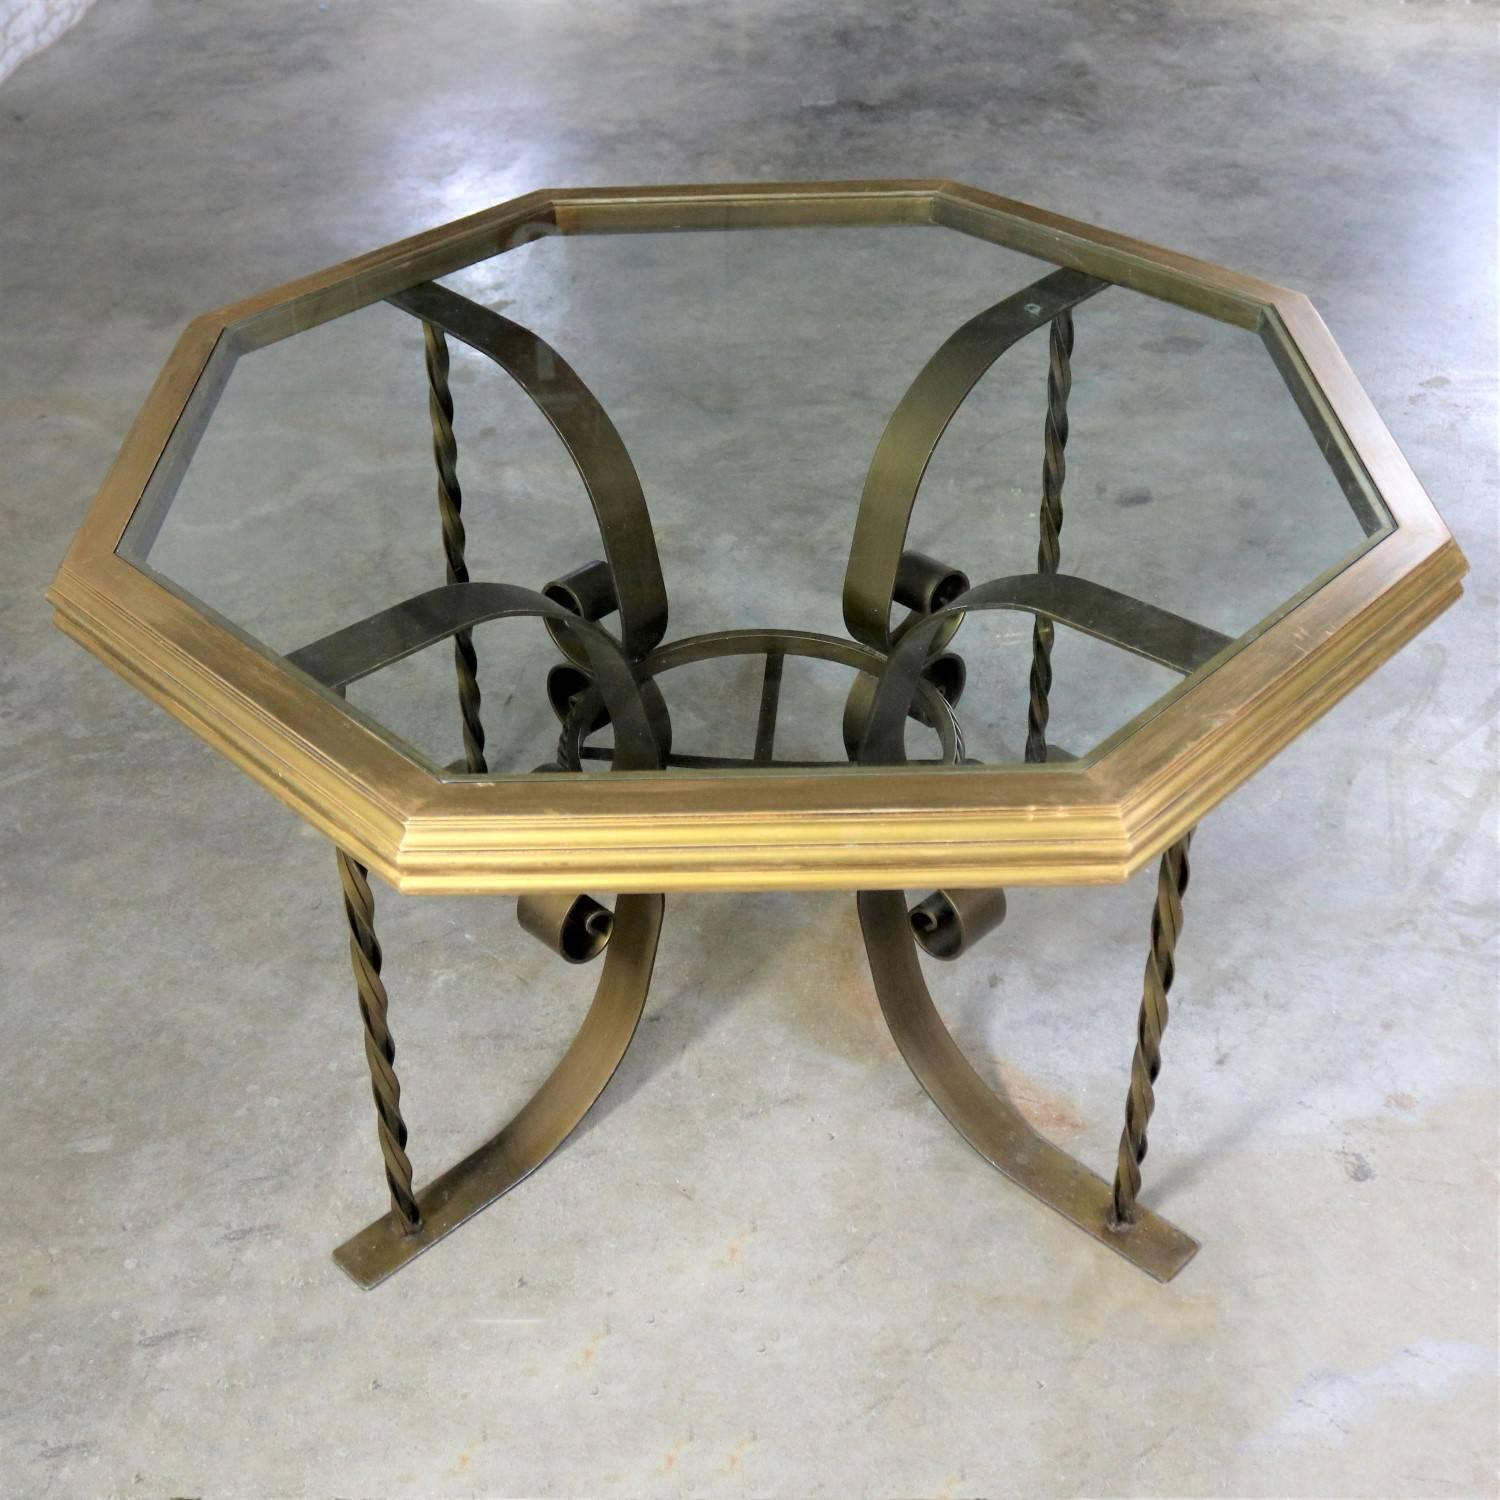 Handsome wrought iron Hollywood Regency style dining table with a wonderful octagon shaped wood rimmed glass top. It is in fabulous condition. The iron base has its original gold painted finish, which with age and use has gained a marvelous patina